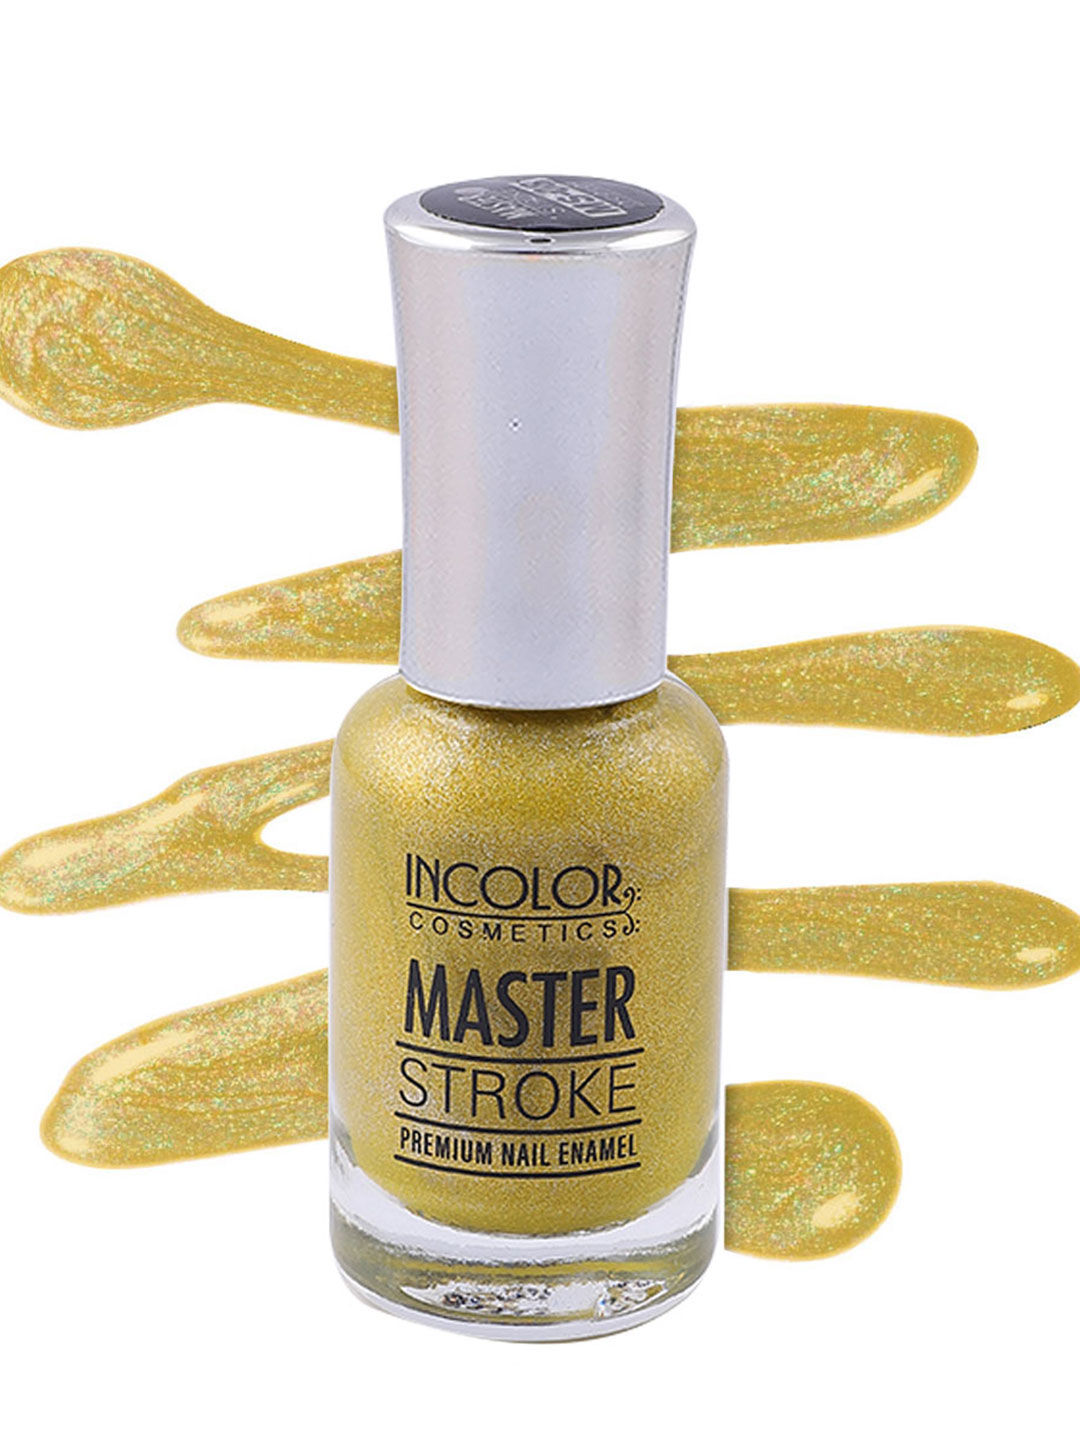 Pin by - सलोनी मल्ल on Board 2 | Nail lacquer, Nails, Free formula